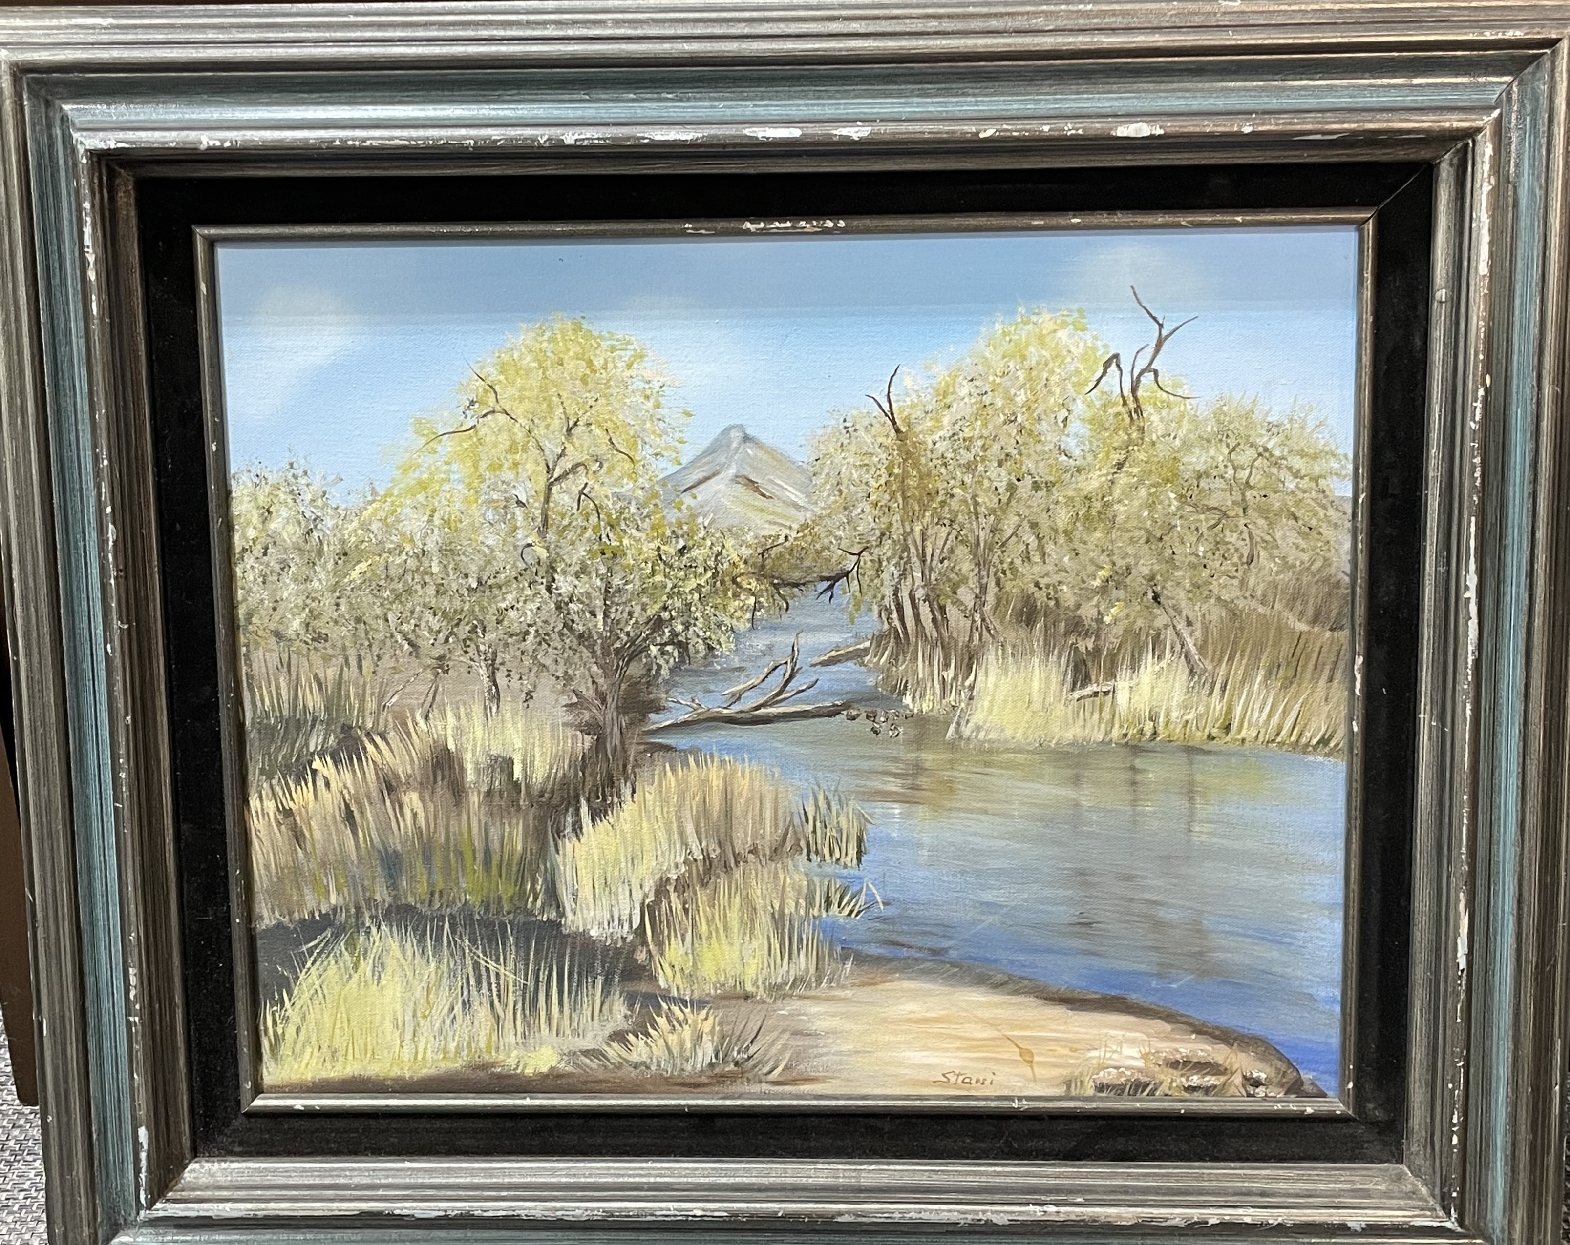   Owen s River   Oil Painting of River and Mountains 
Framed
Estanislada Mcpherson